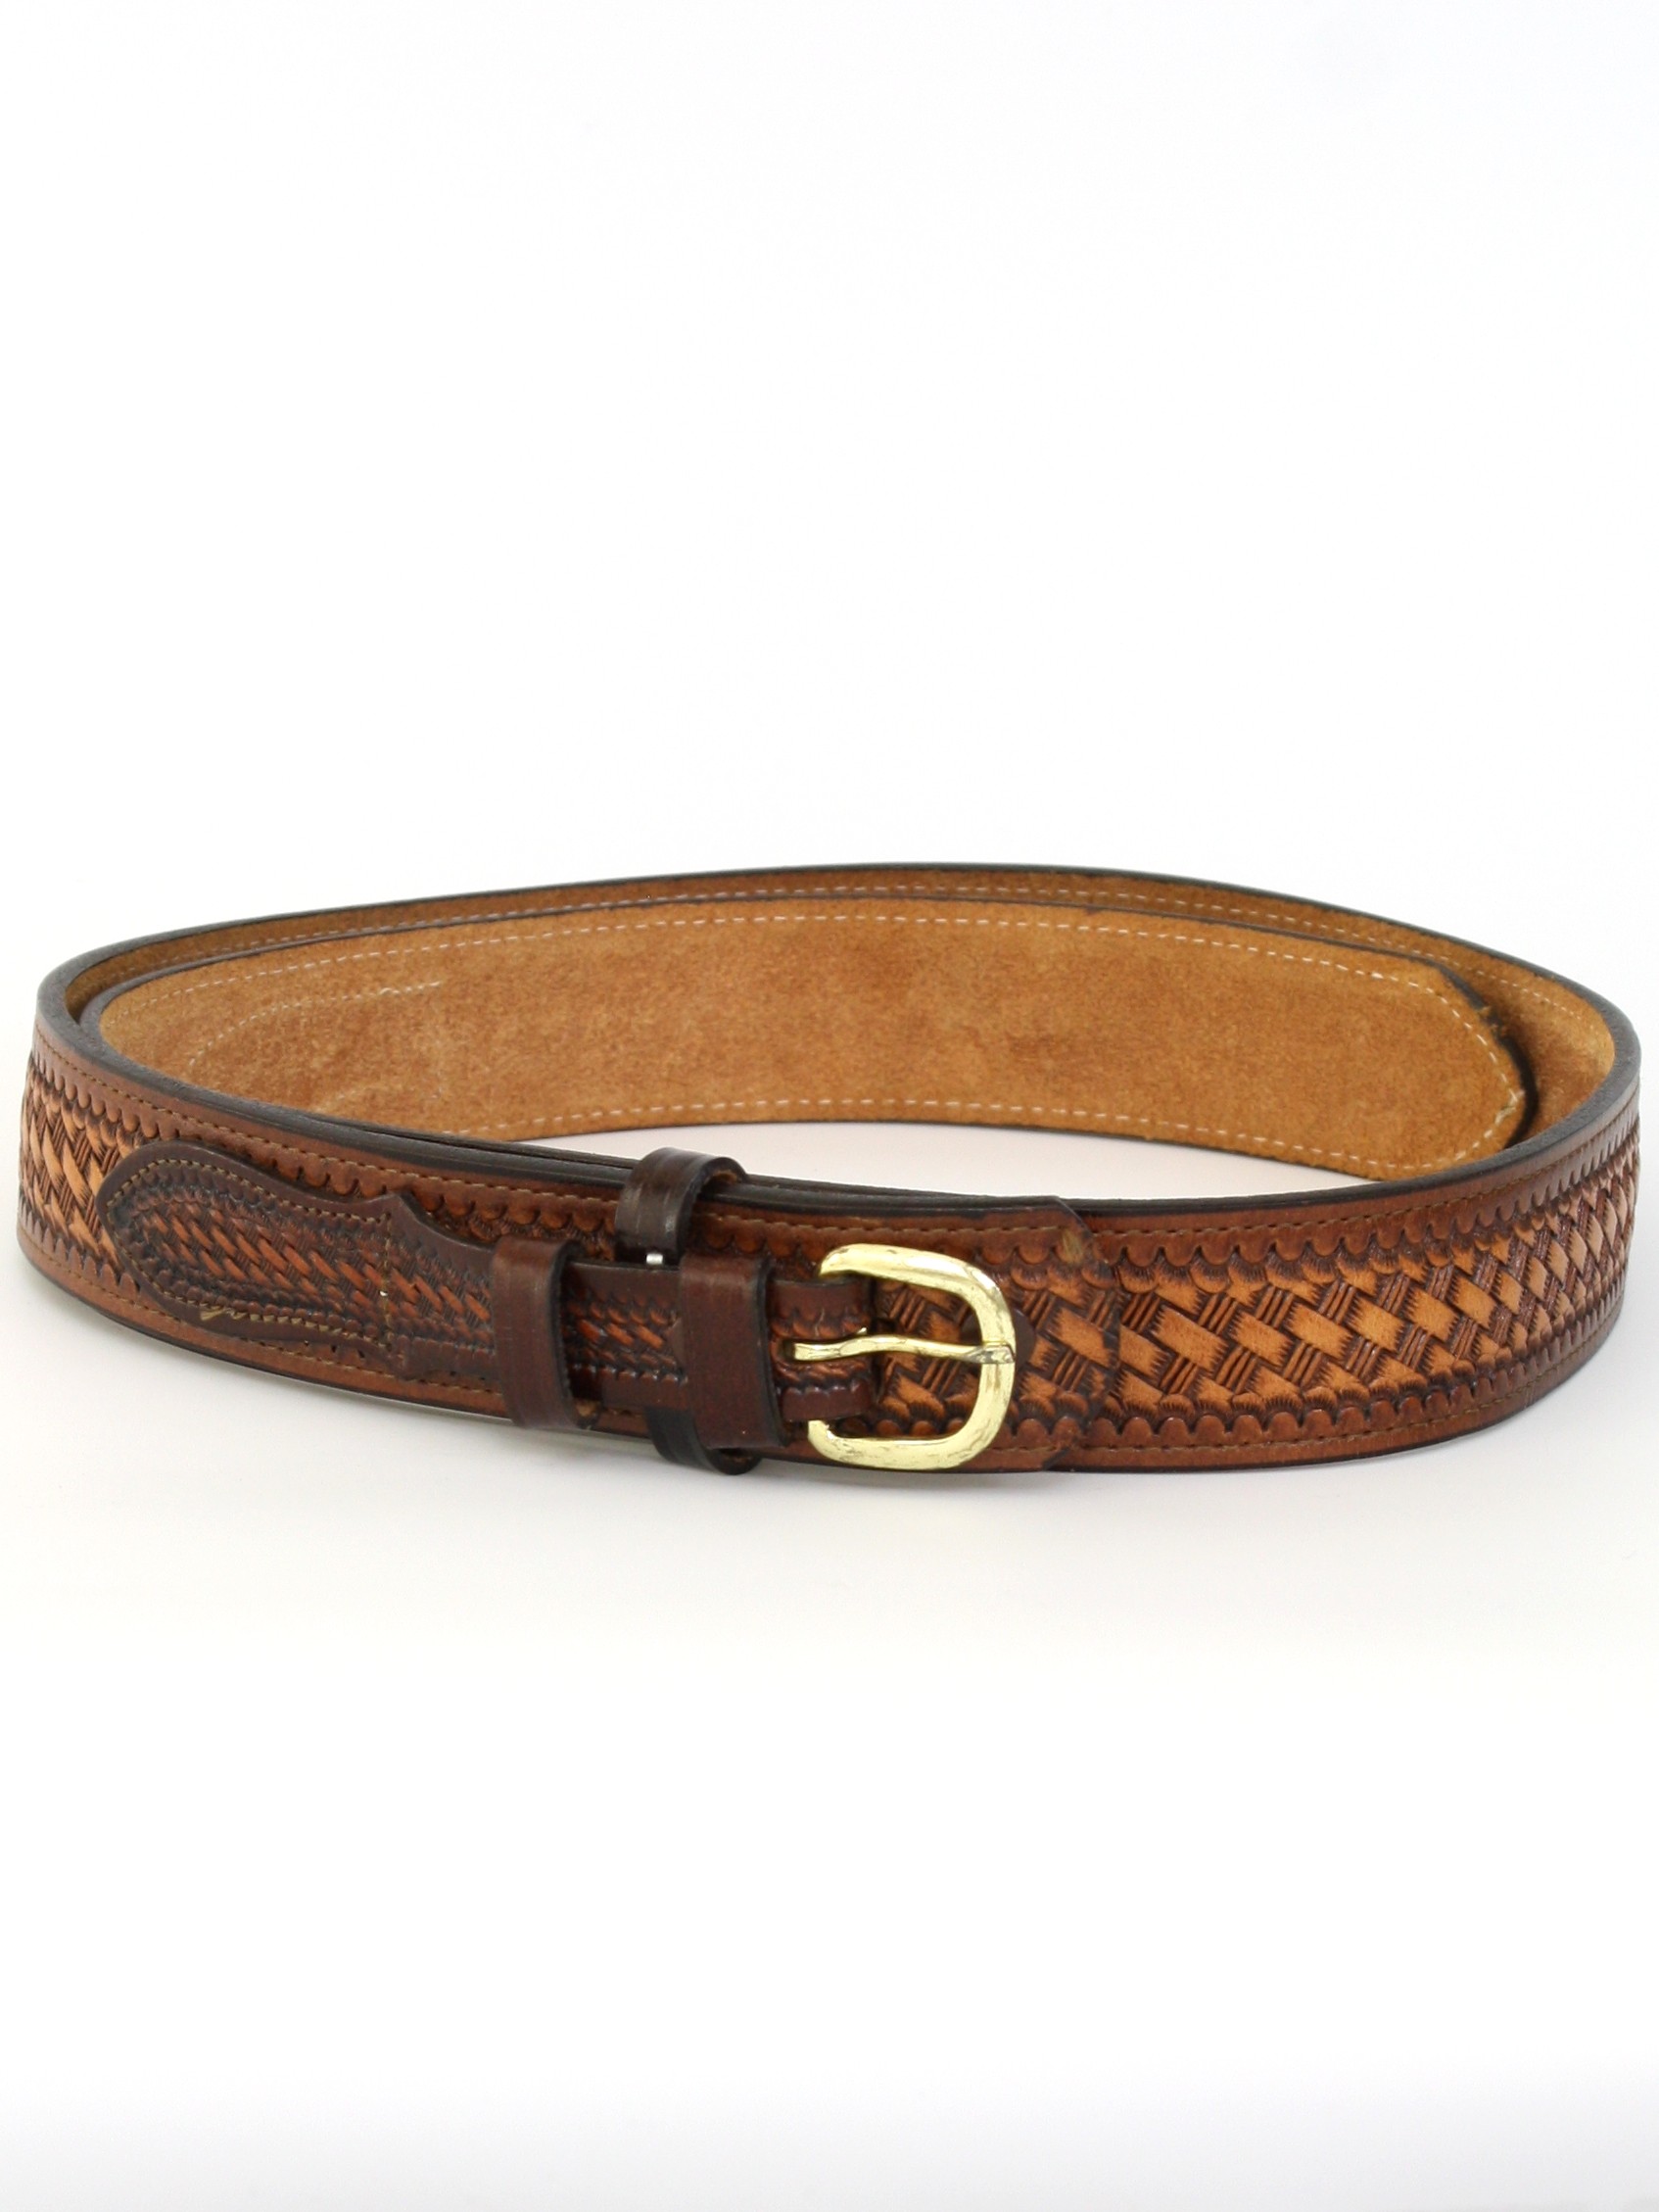 90s Retro Belt: Early 90s -Wright- Mens burnished brown and saddle tan ...